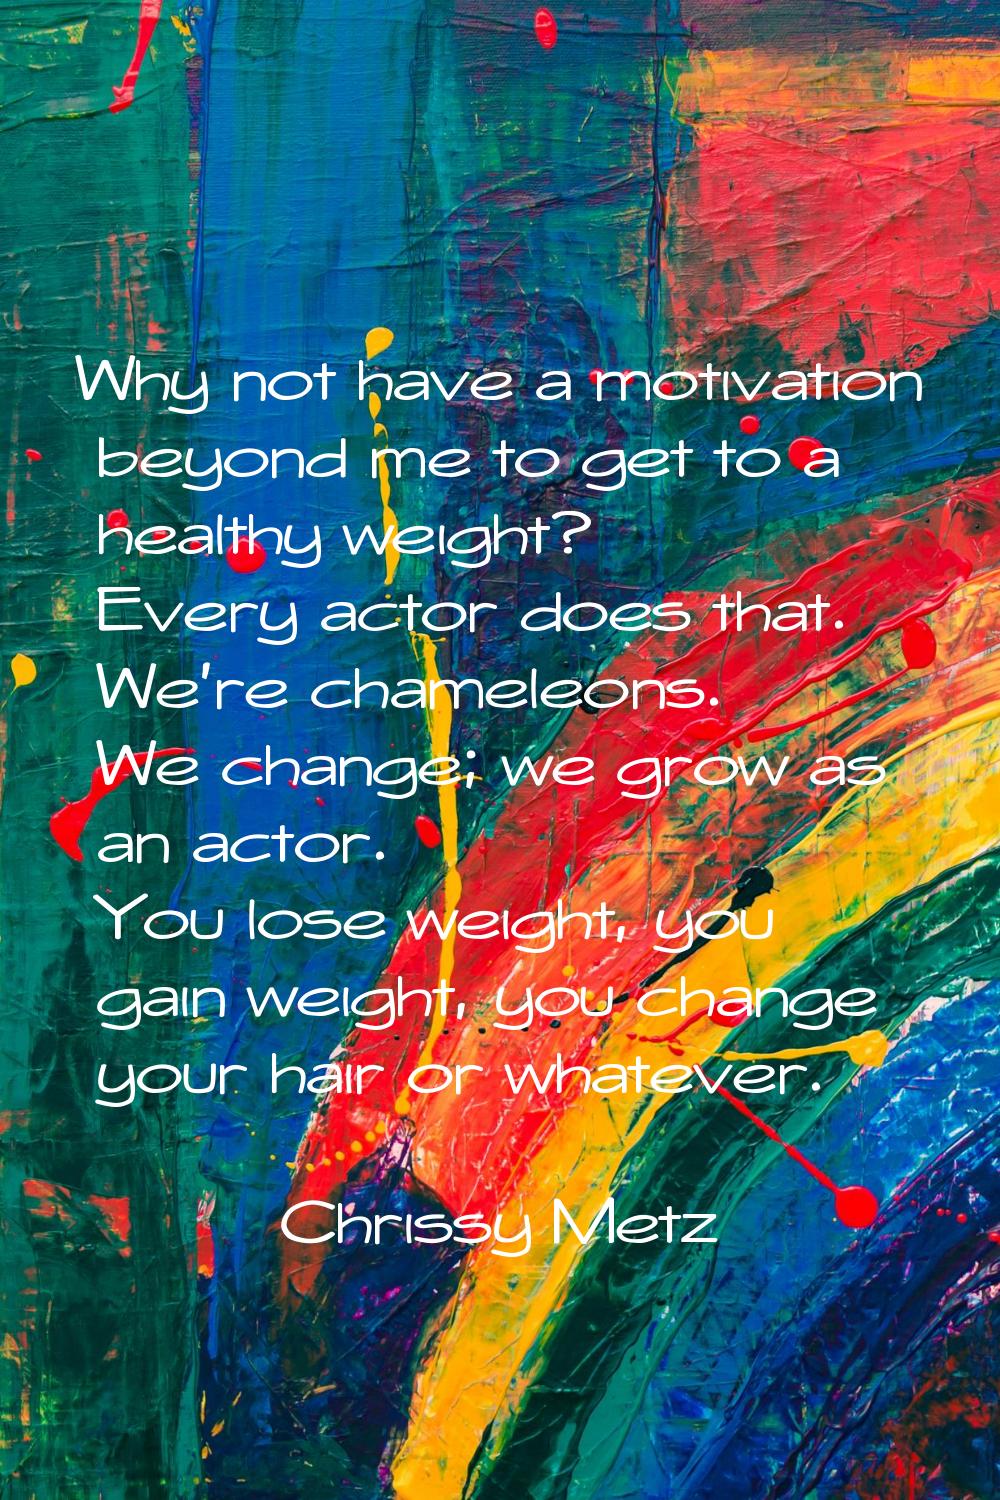 Why not have a motivation beyond me to get to a healthy weight? Every actor does that. We're chamel